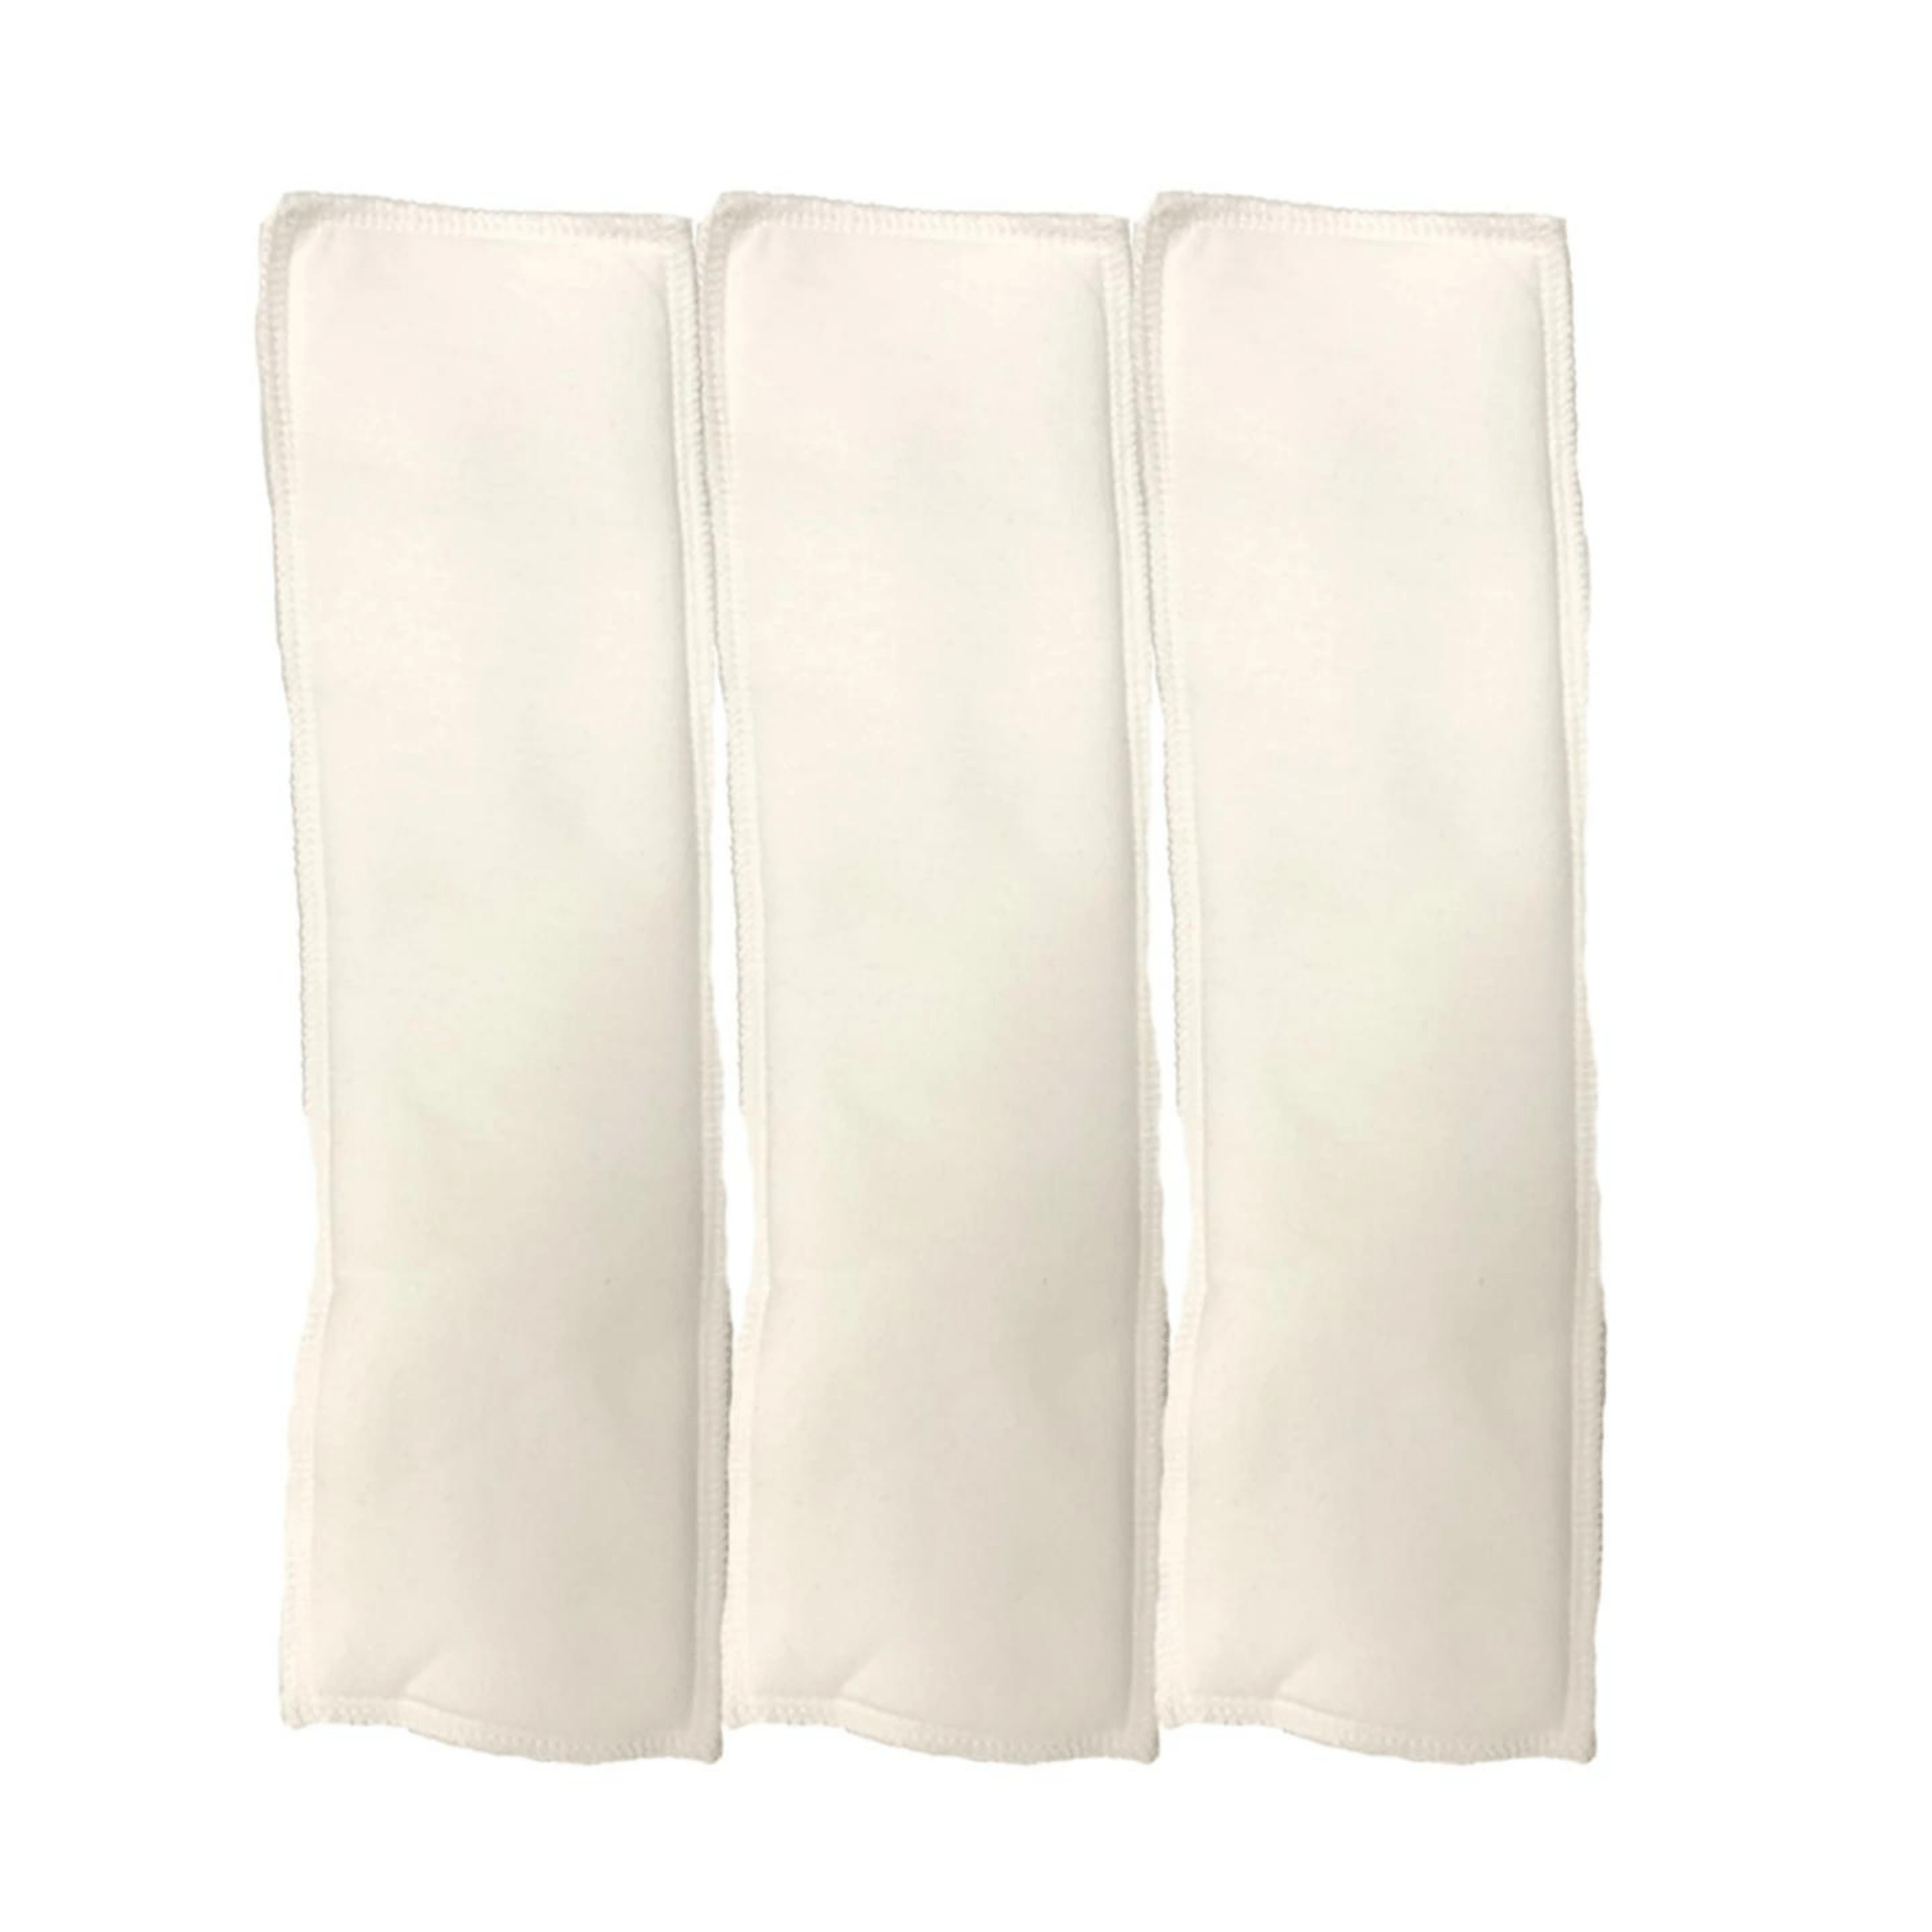 Brolly Sheets Kids Incontinence Booster Pad | 3 Pack - Caring Clothing